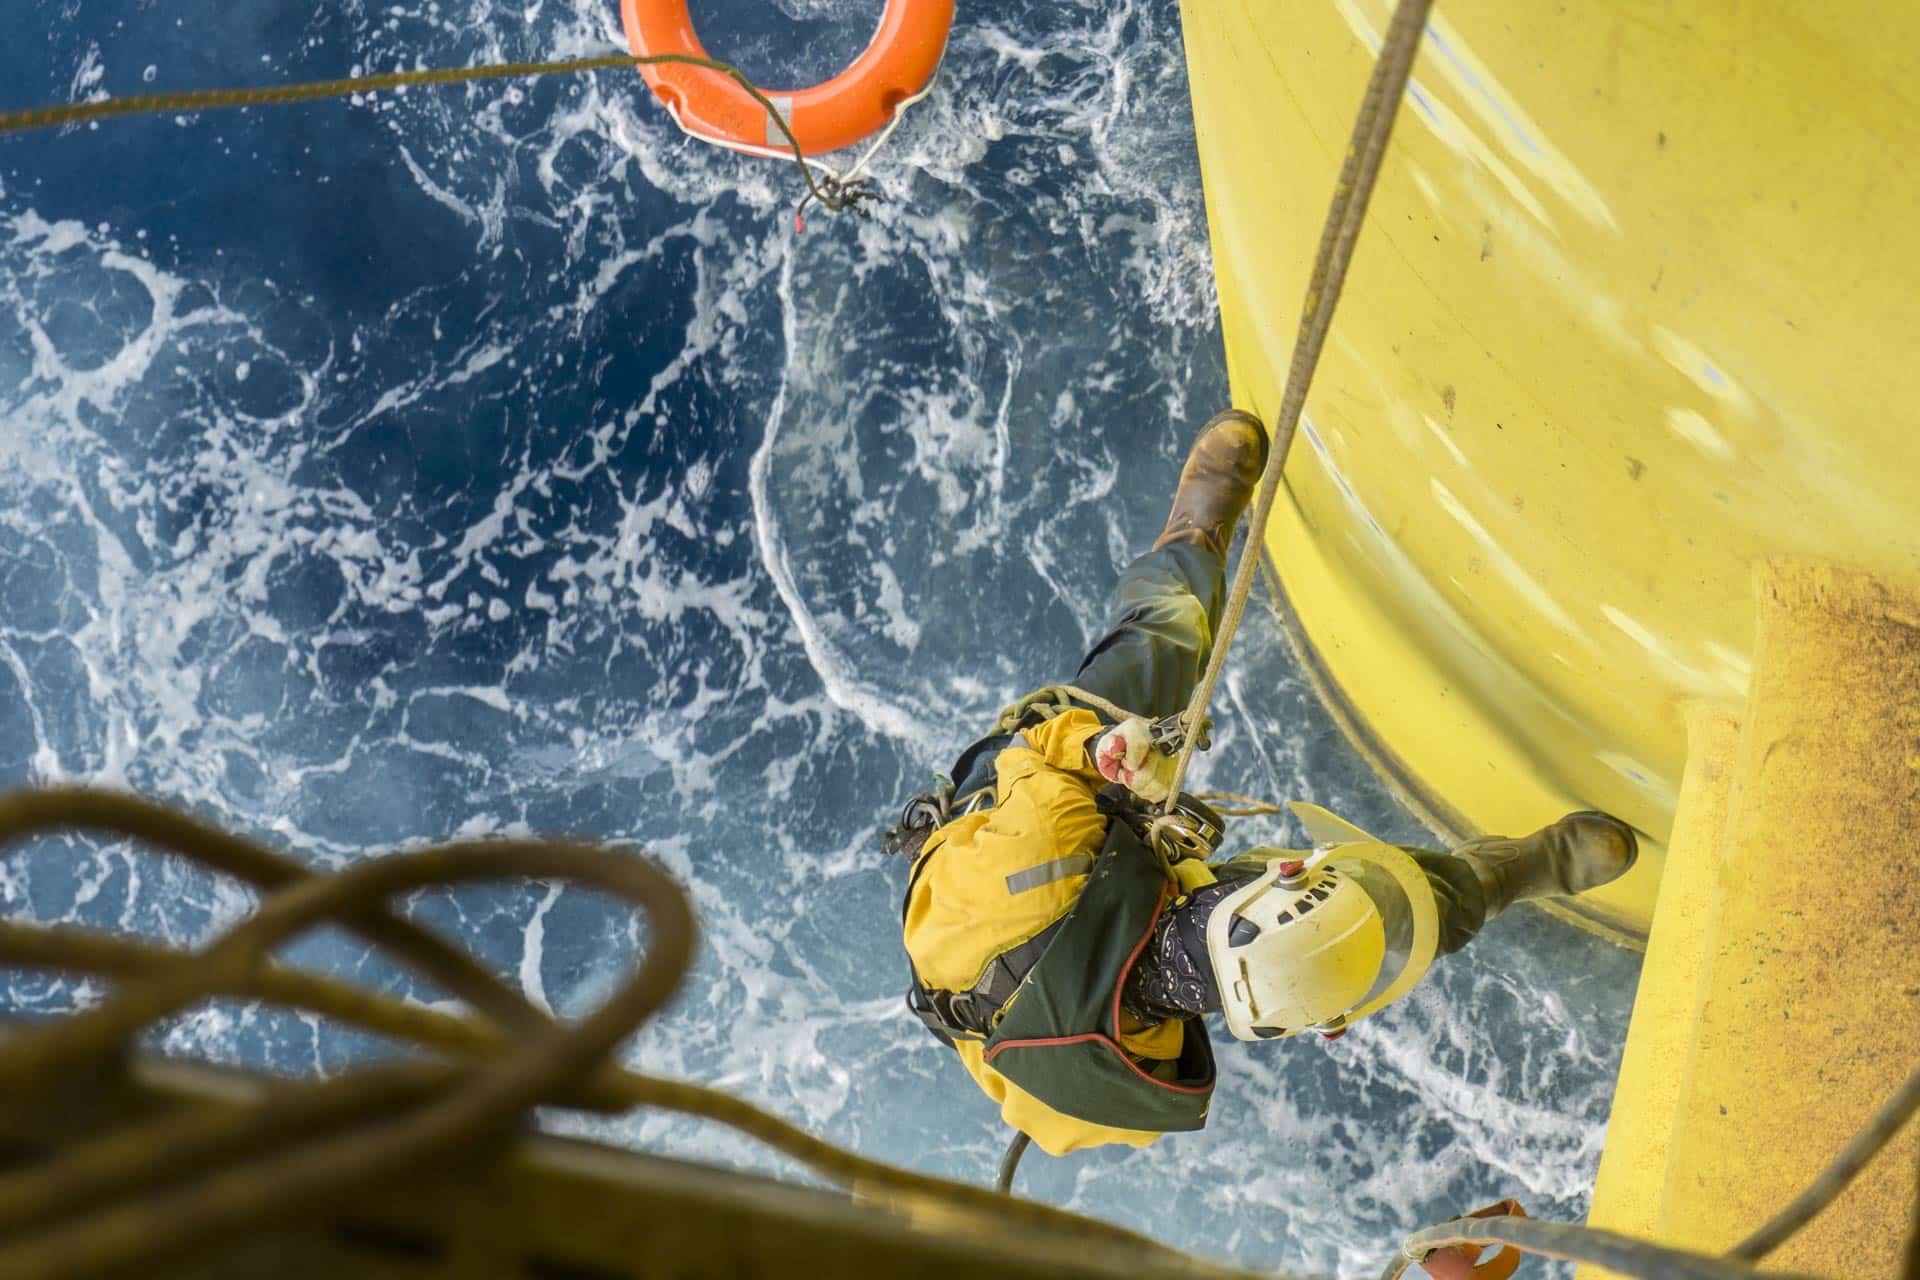 Working overboard. A commercial abseiler complete with personal protective equipment (ppe) hanging at oil and gas platform jacket module while life buoy standby on sea surface.